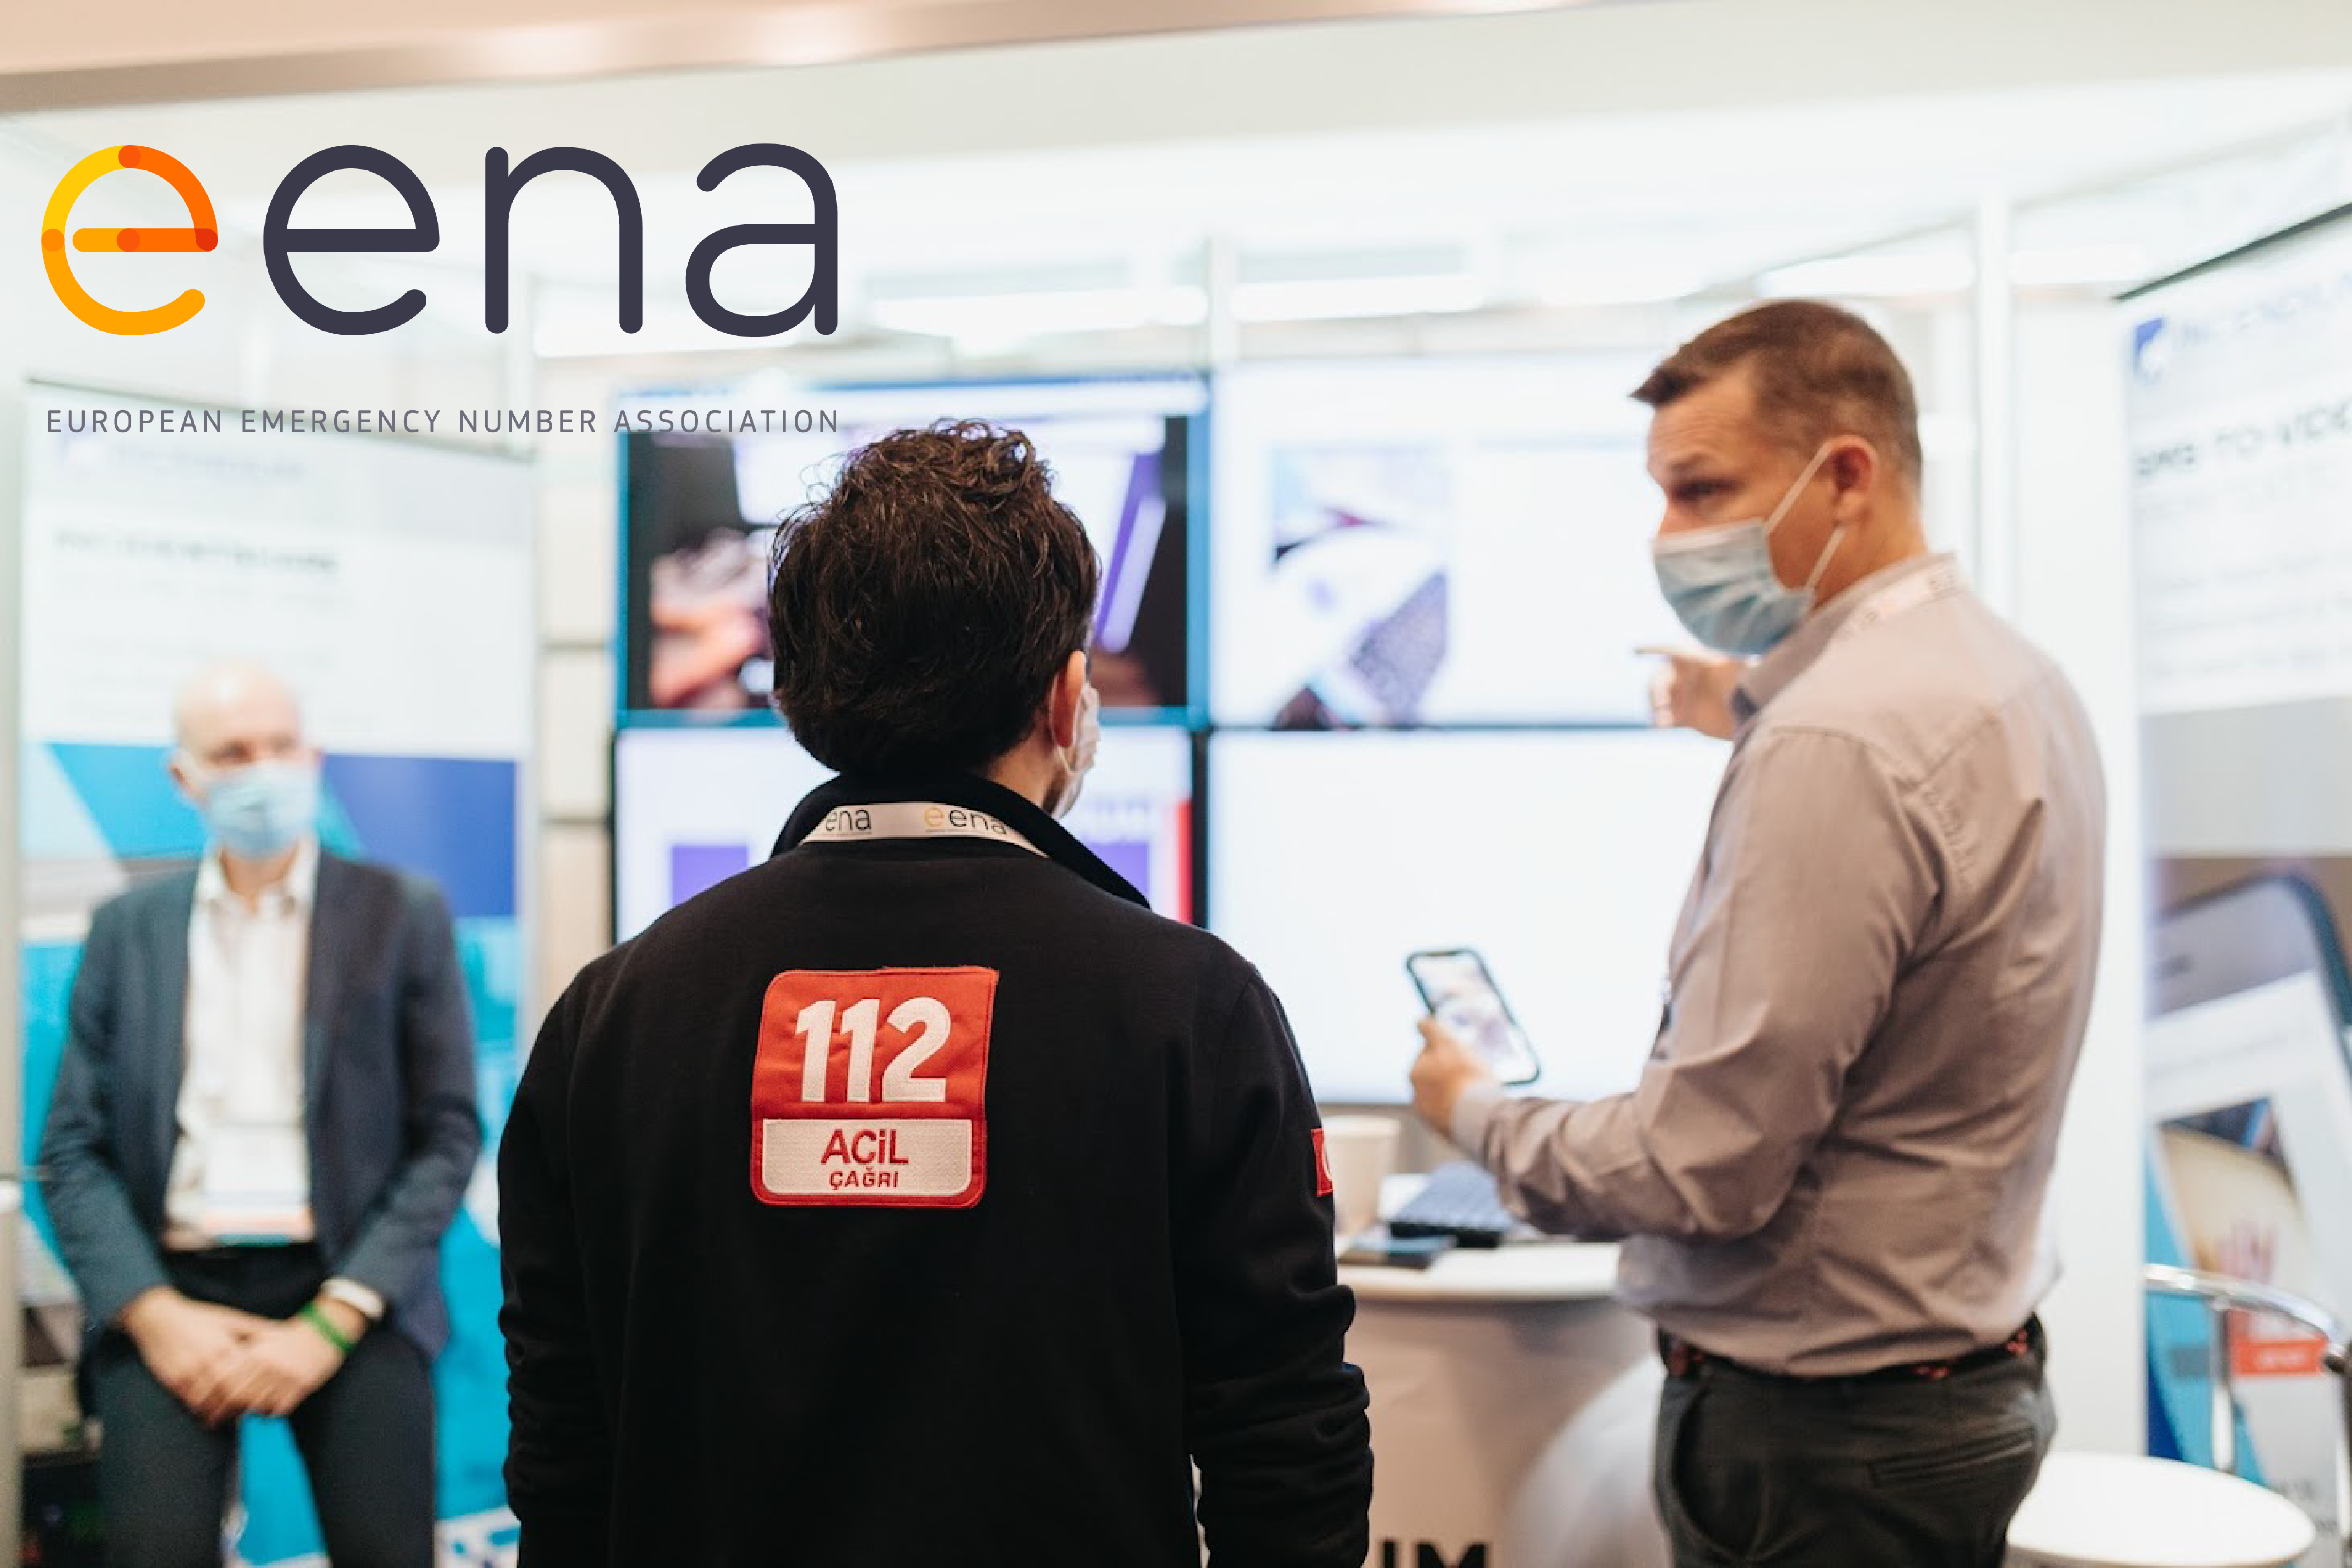 Man demonstrates video solution at EENA conference